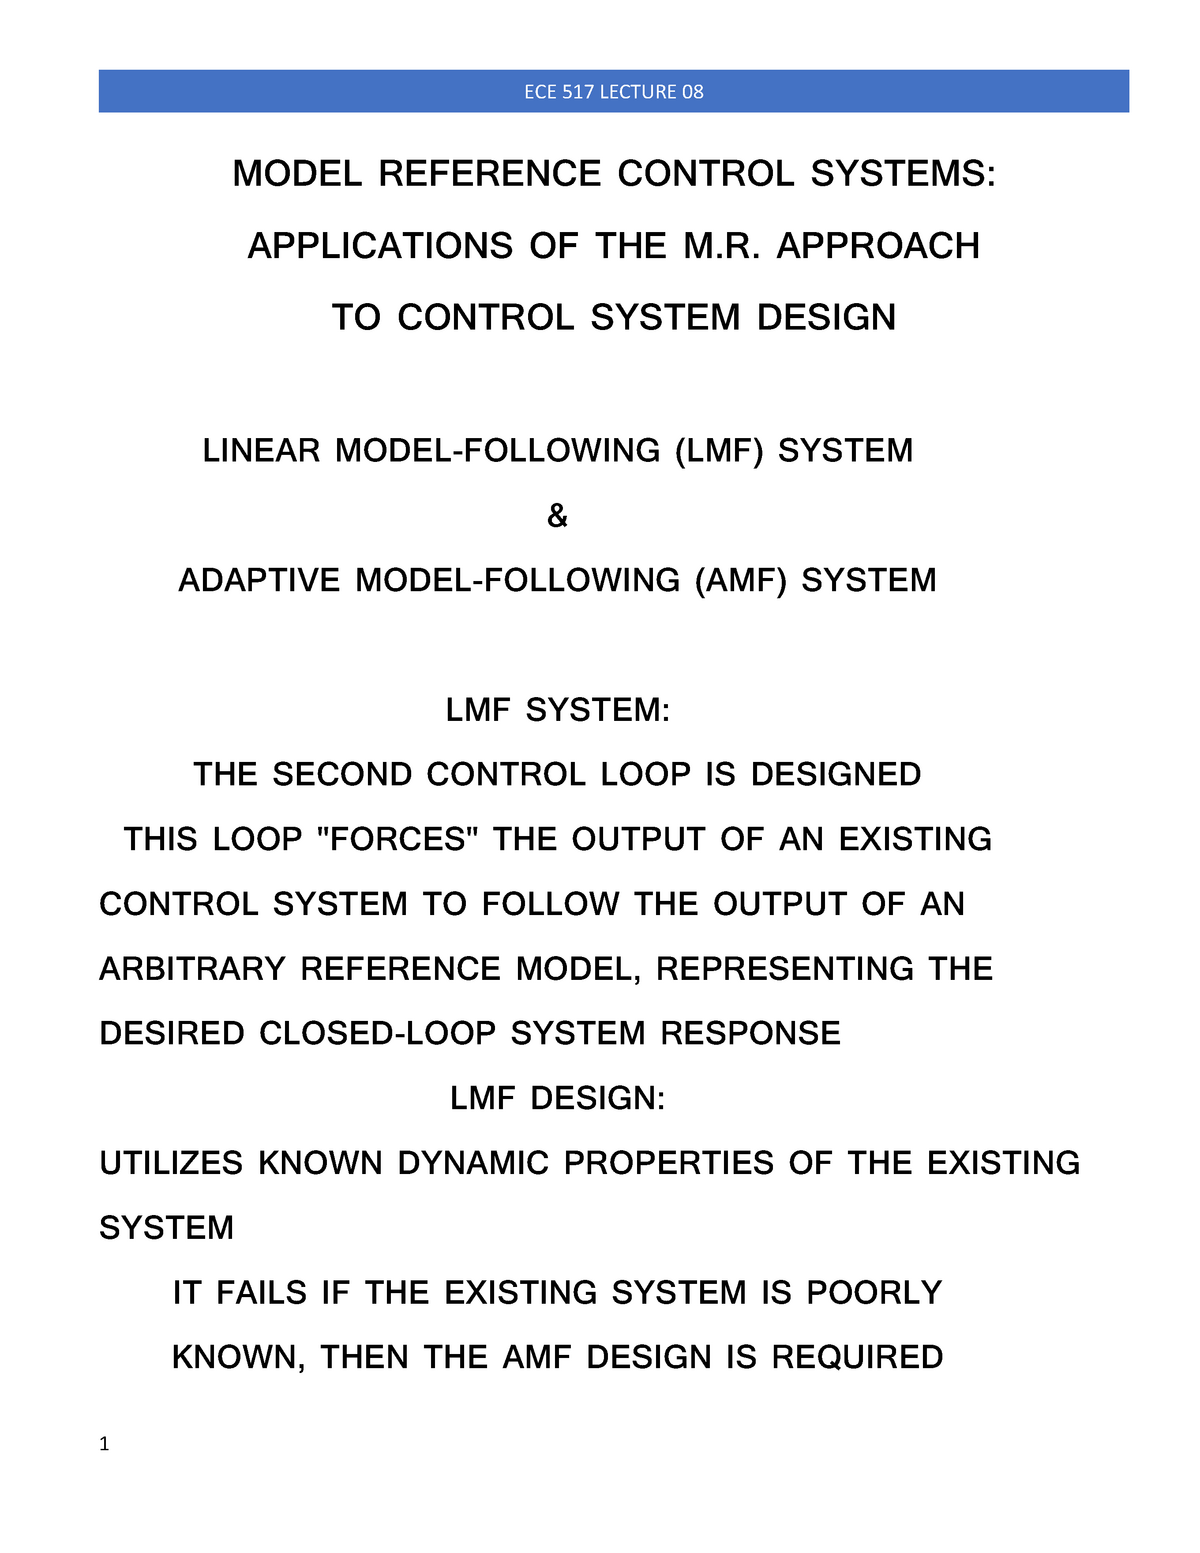 Model Reference Control